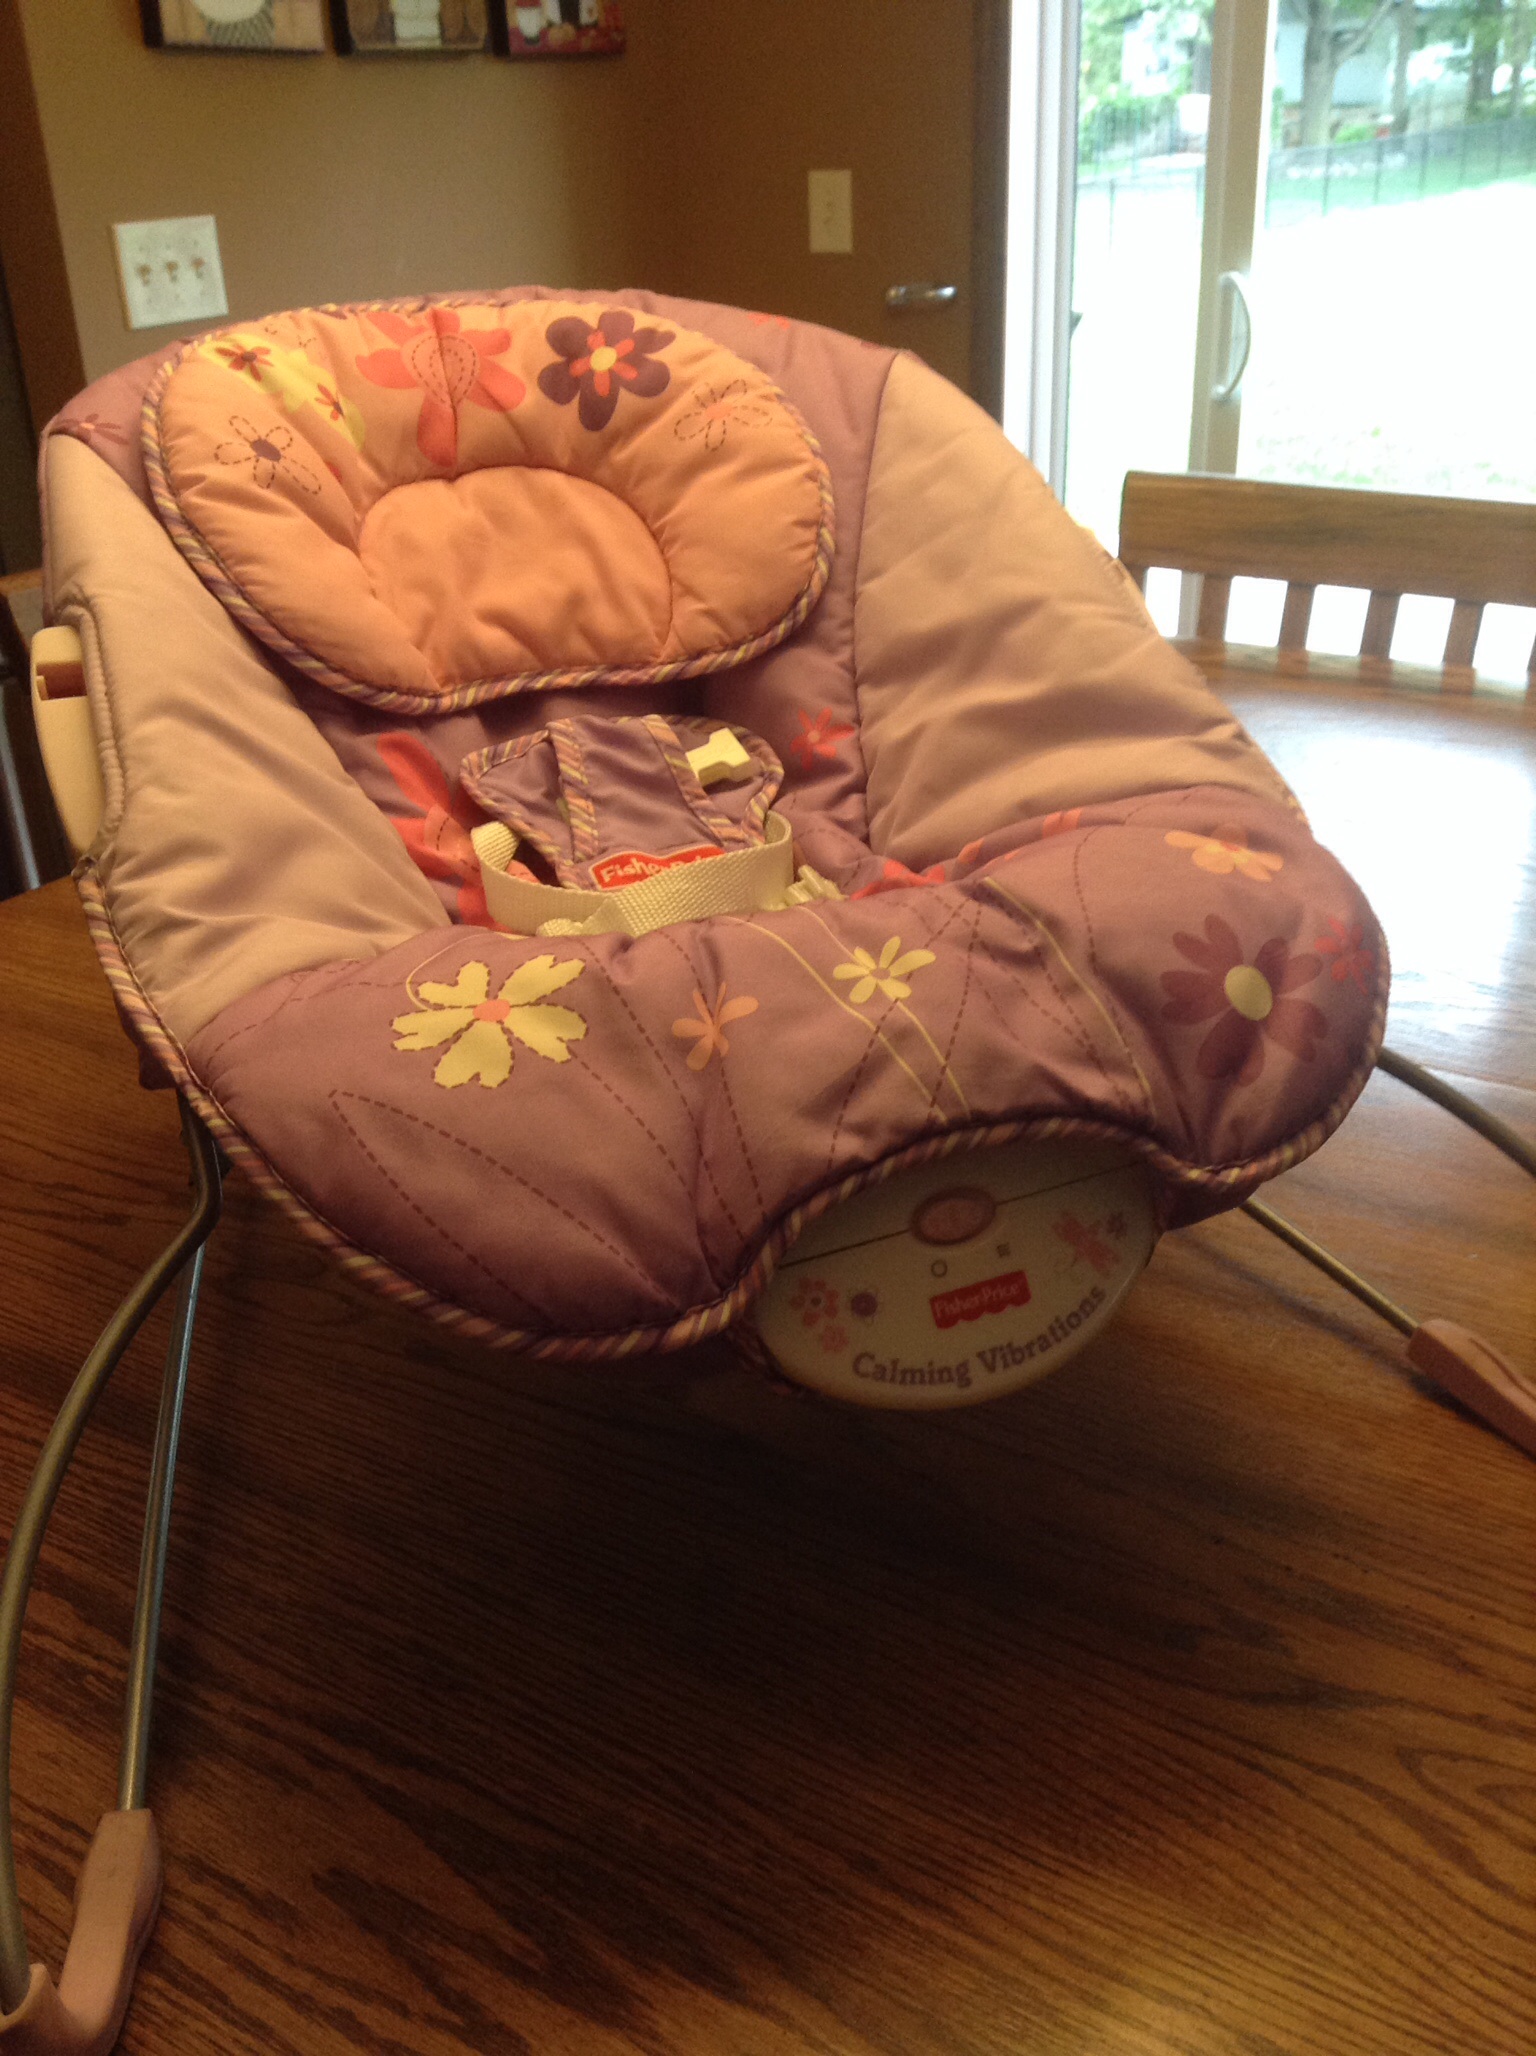 Fisher Price Calming Vibrations infant seat